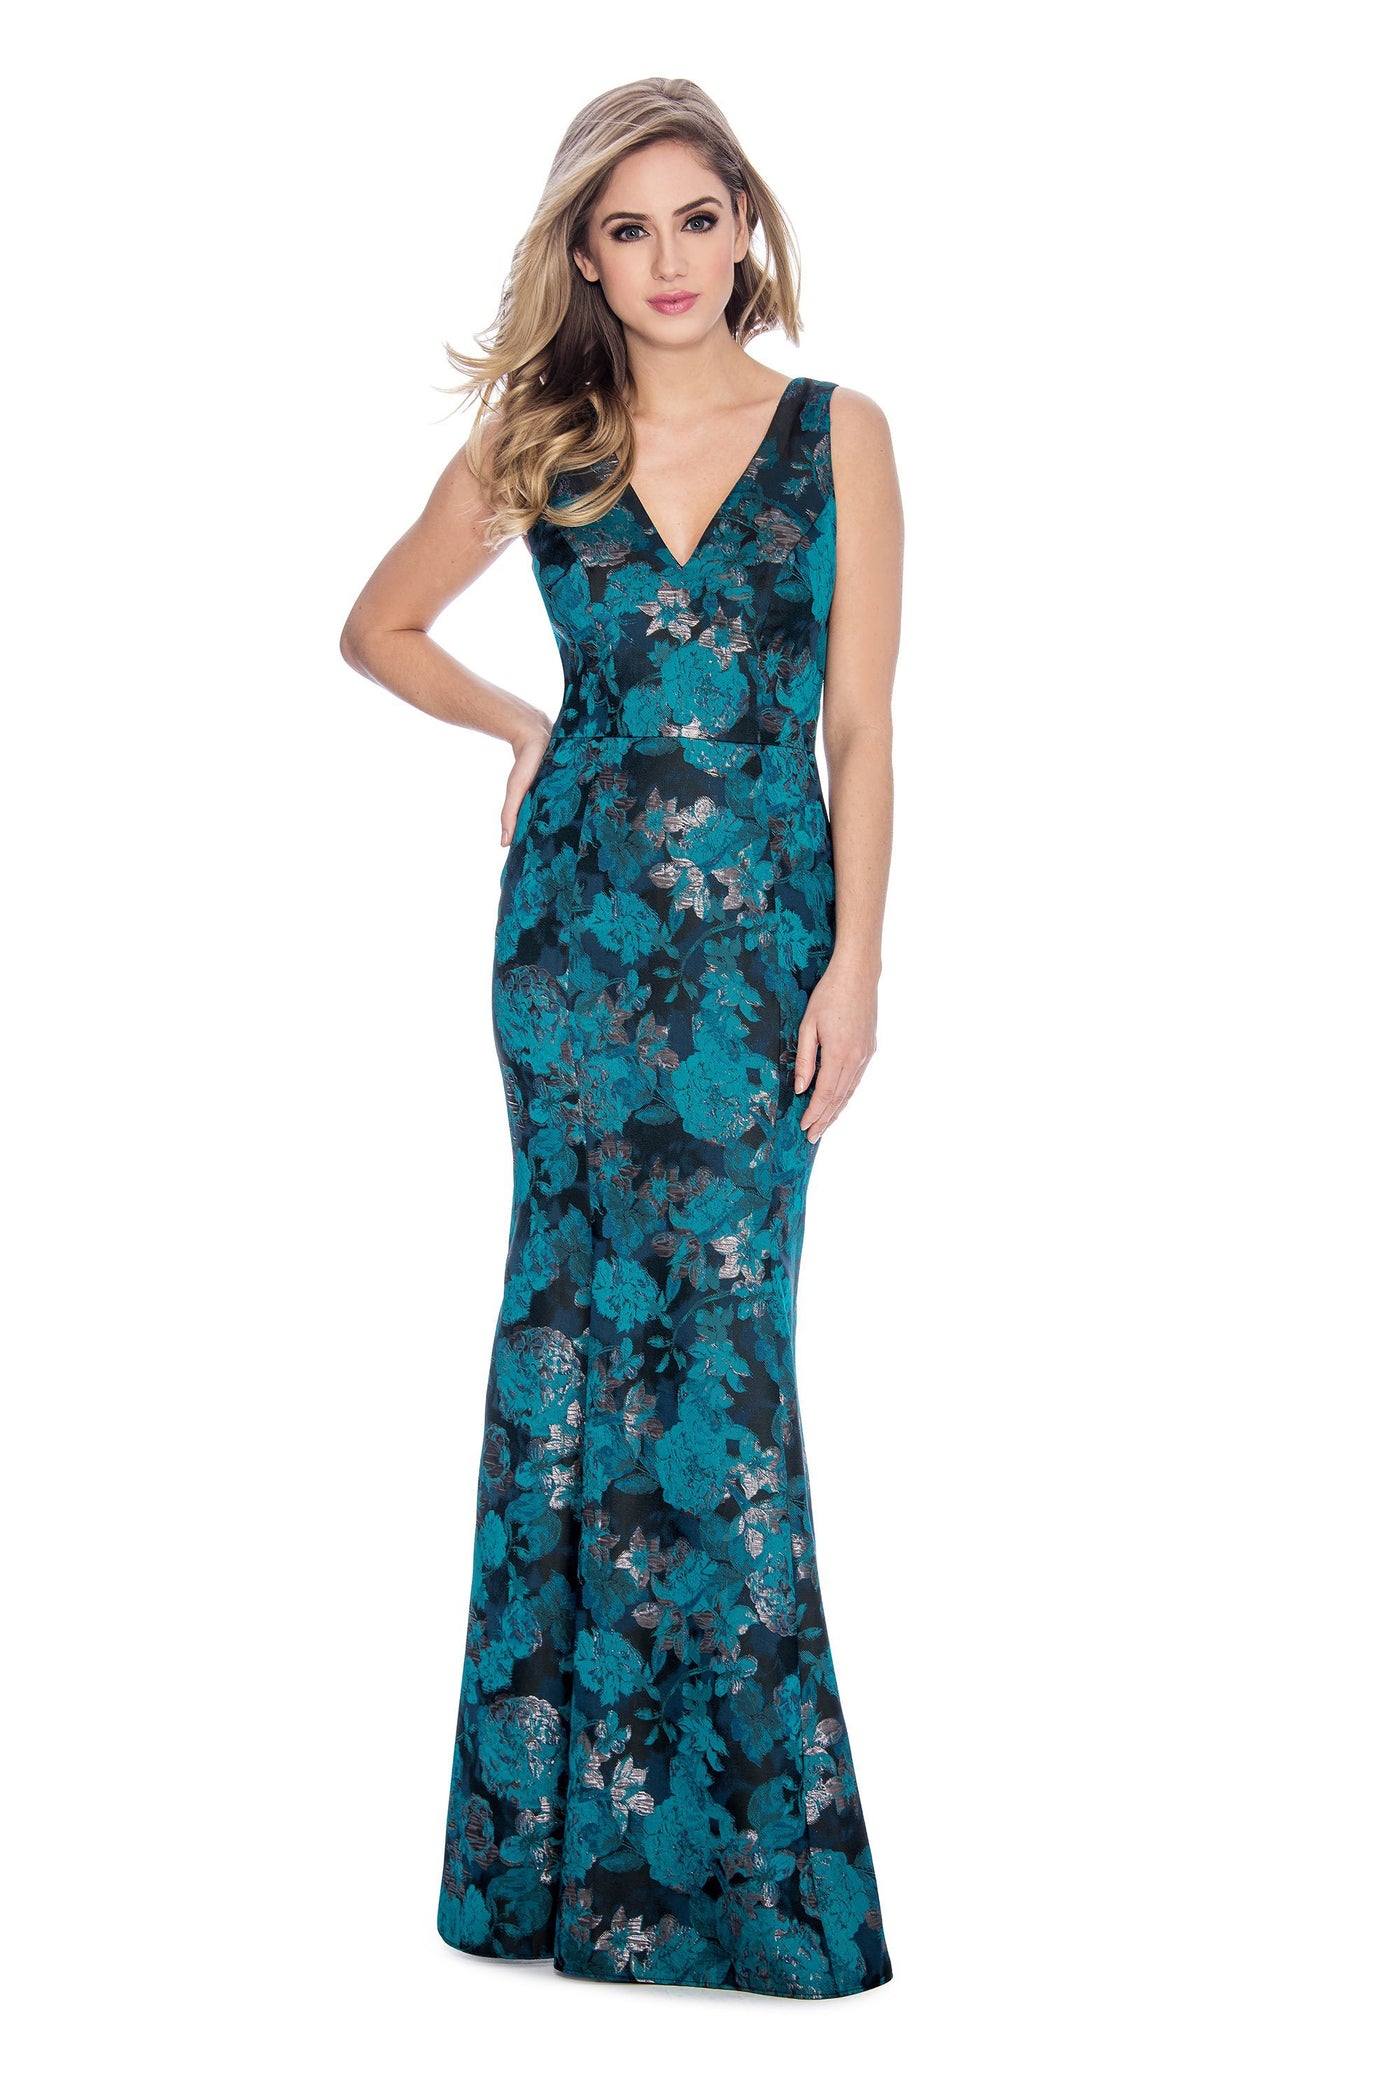 Decode 1.8 - 184659 Floral Print Jacquard Trumpet Dress In Green and Multi-Color